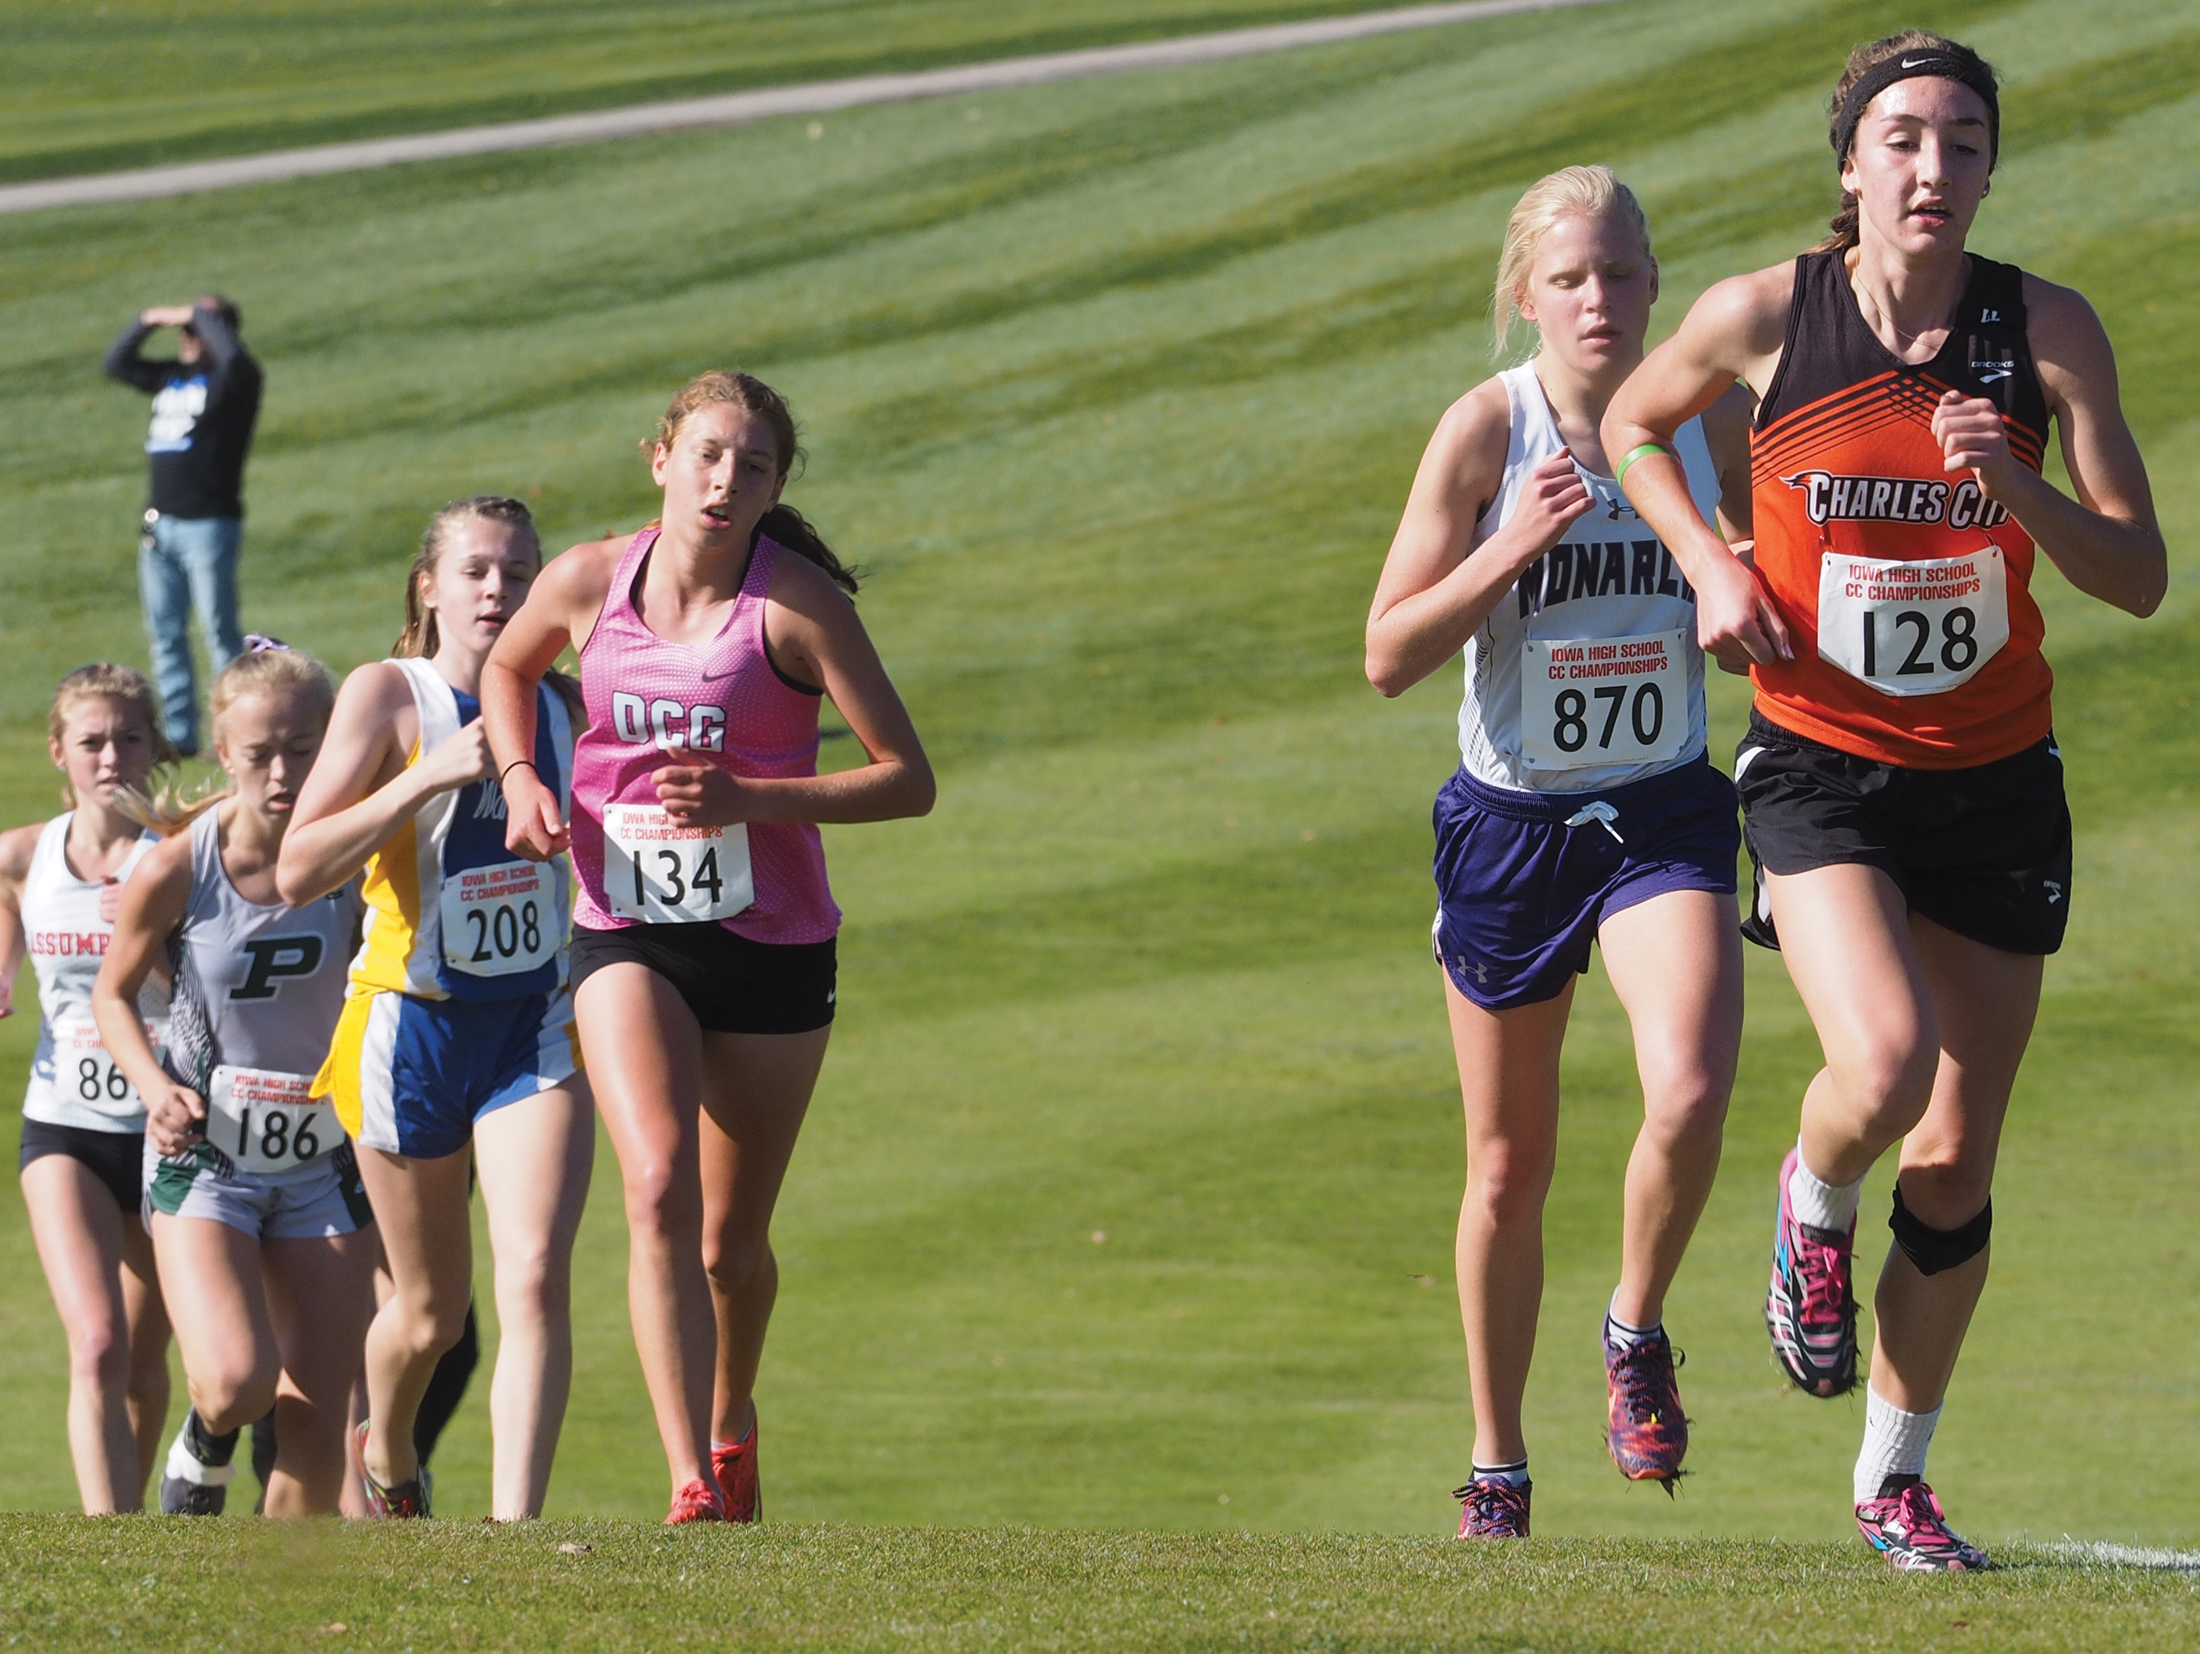 Charles City girls place 12th at XC State Championships